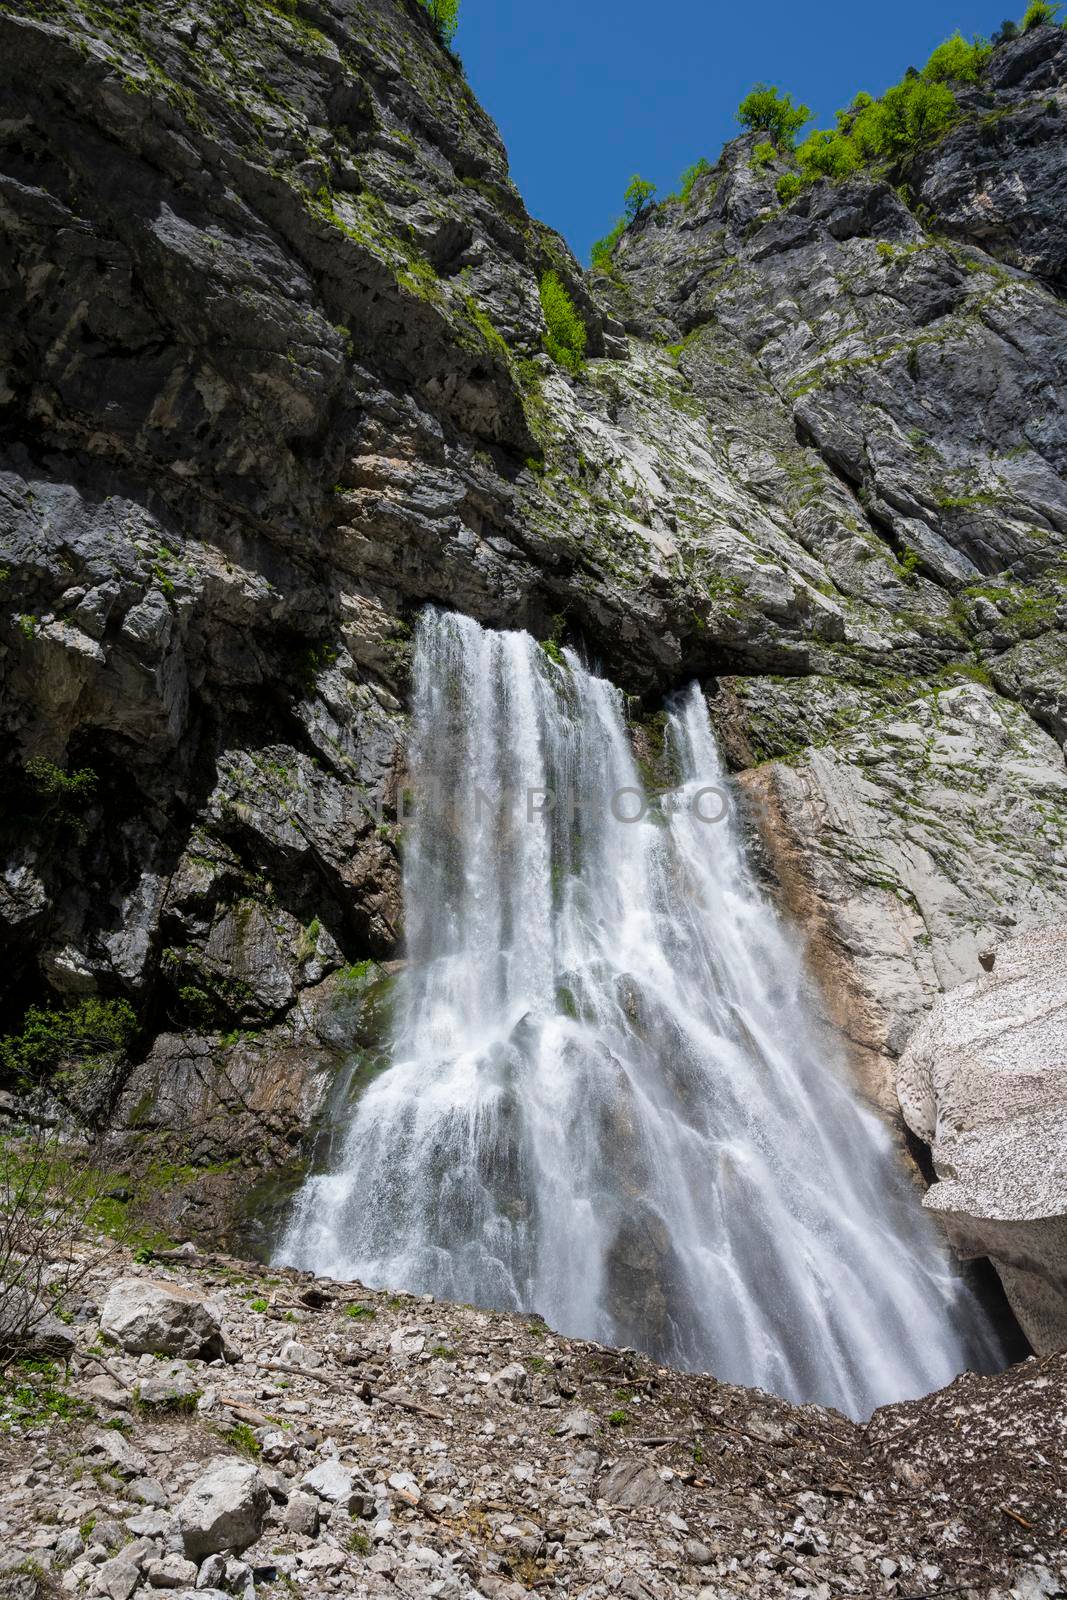 Geghsky waterfall in the mountains of the Republic of Abkhazia. Clear sunny day May 14, 2021.